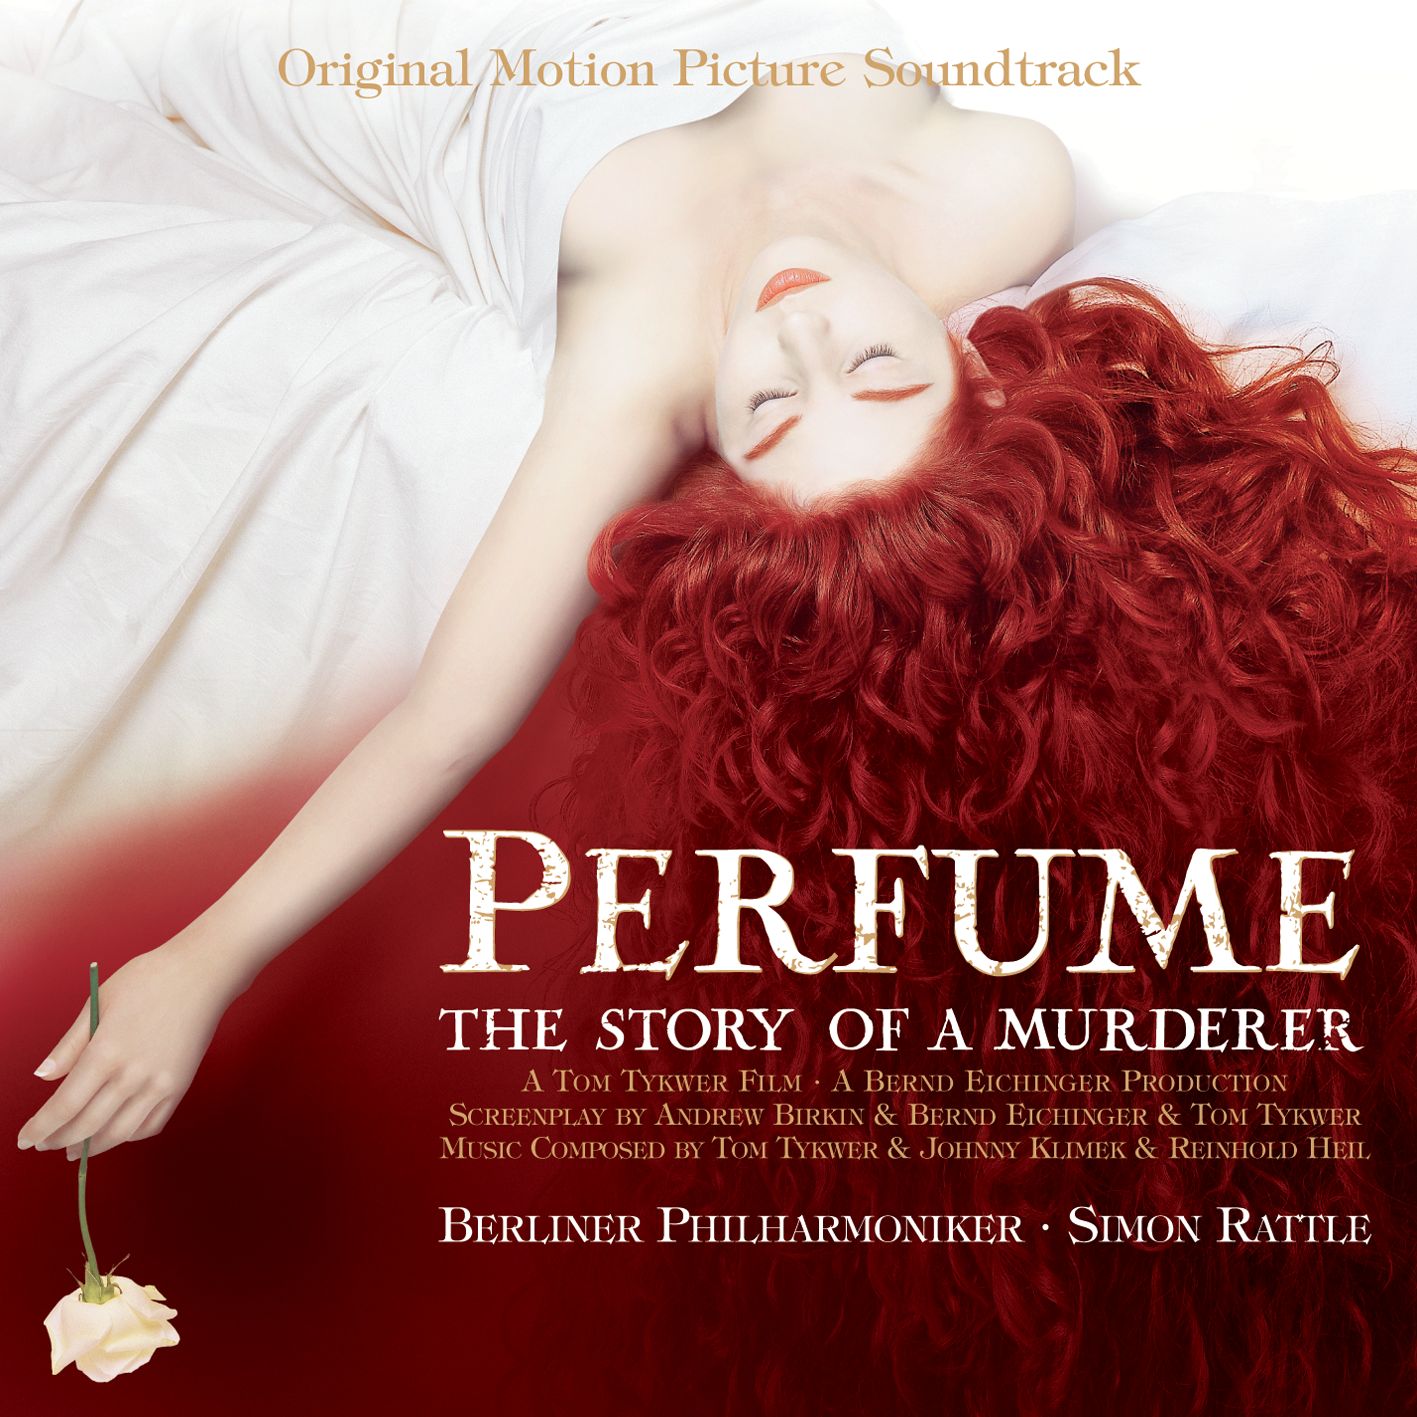 Perfume - The Story of a Murderer [Original Motion Picture Soundtrack]